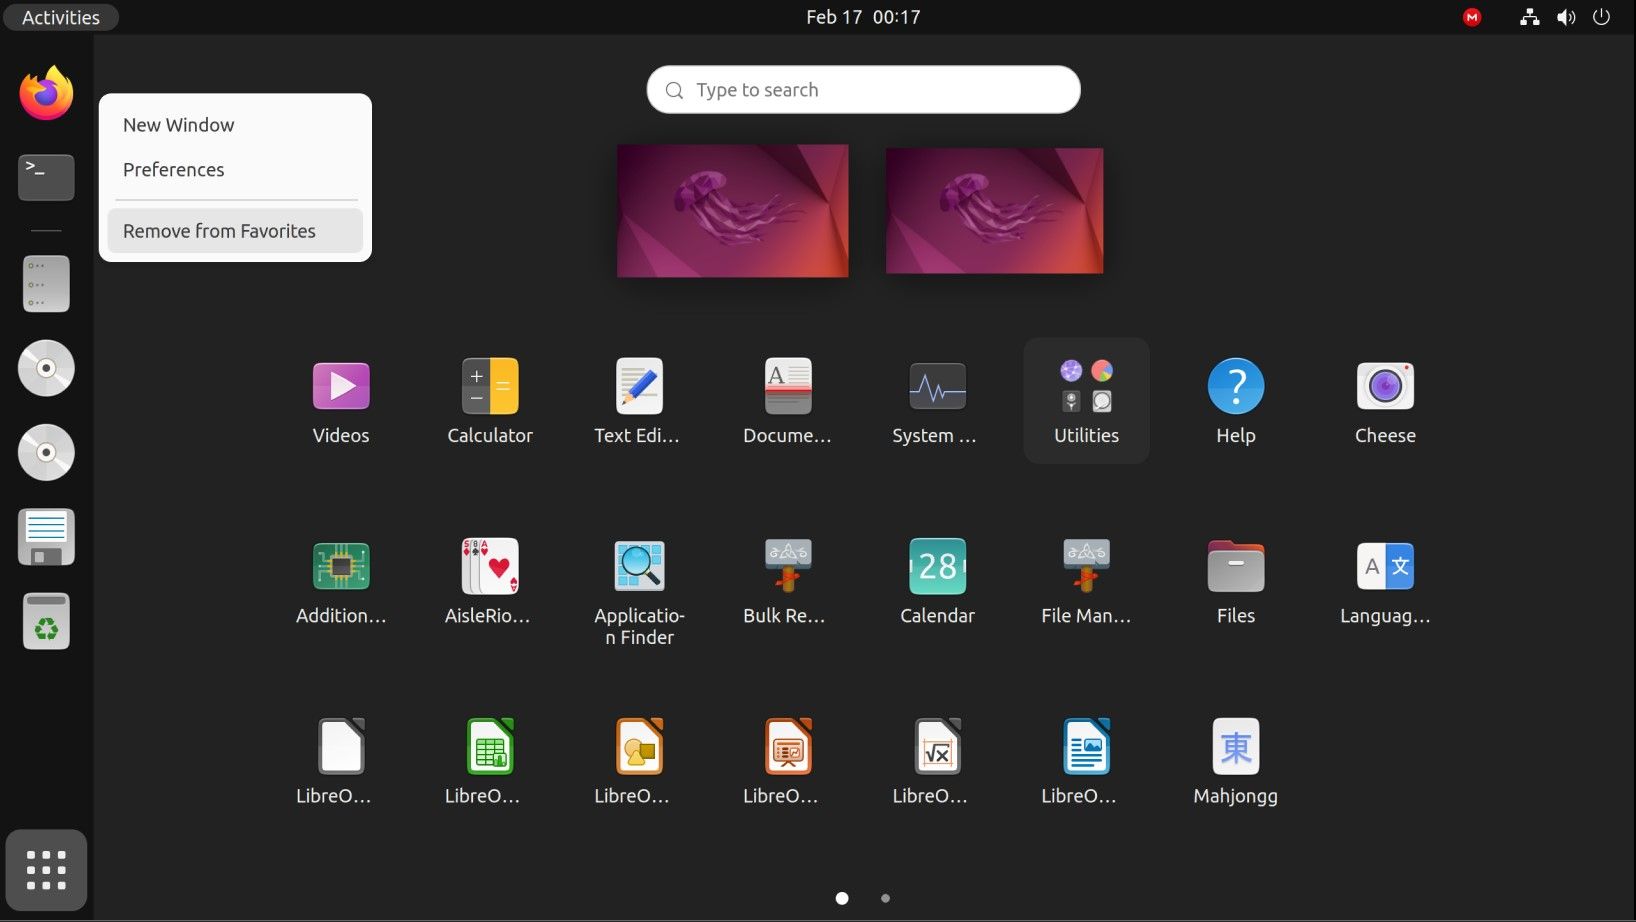 List of shortcuts and icons on Ubuntu